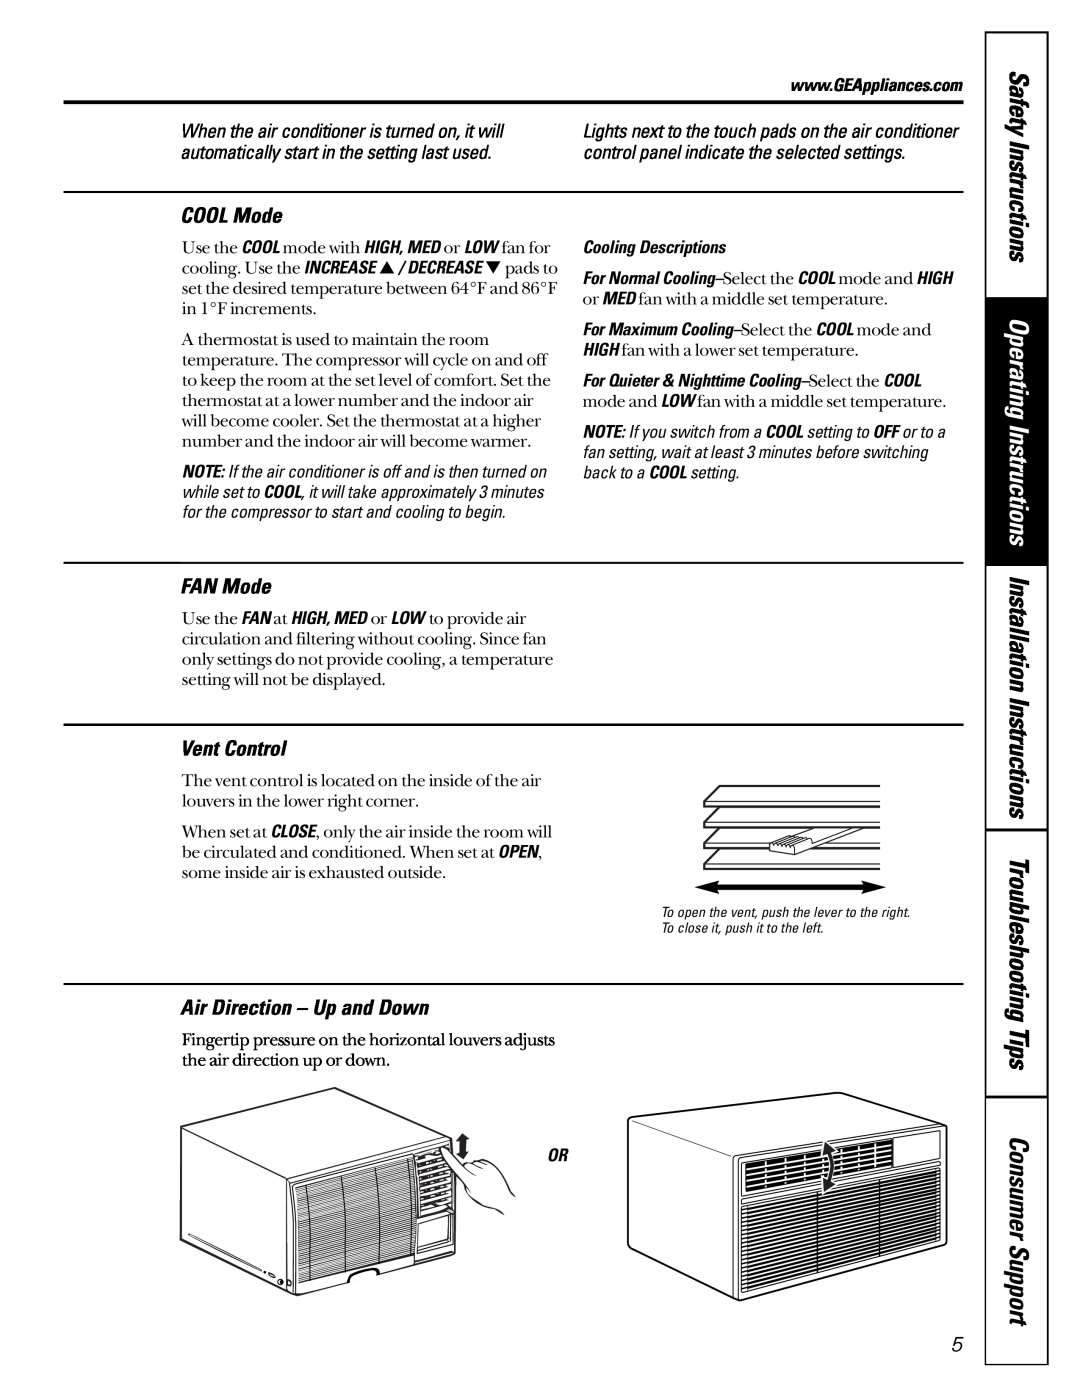 GE ASP10 Operating Instructions, COOL Mode, FAN Mode, Vent Control, Air Direction - Up and Down, Cooling Descriptions 